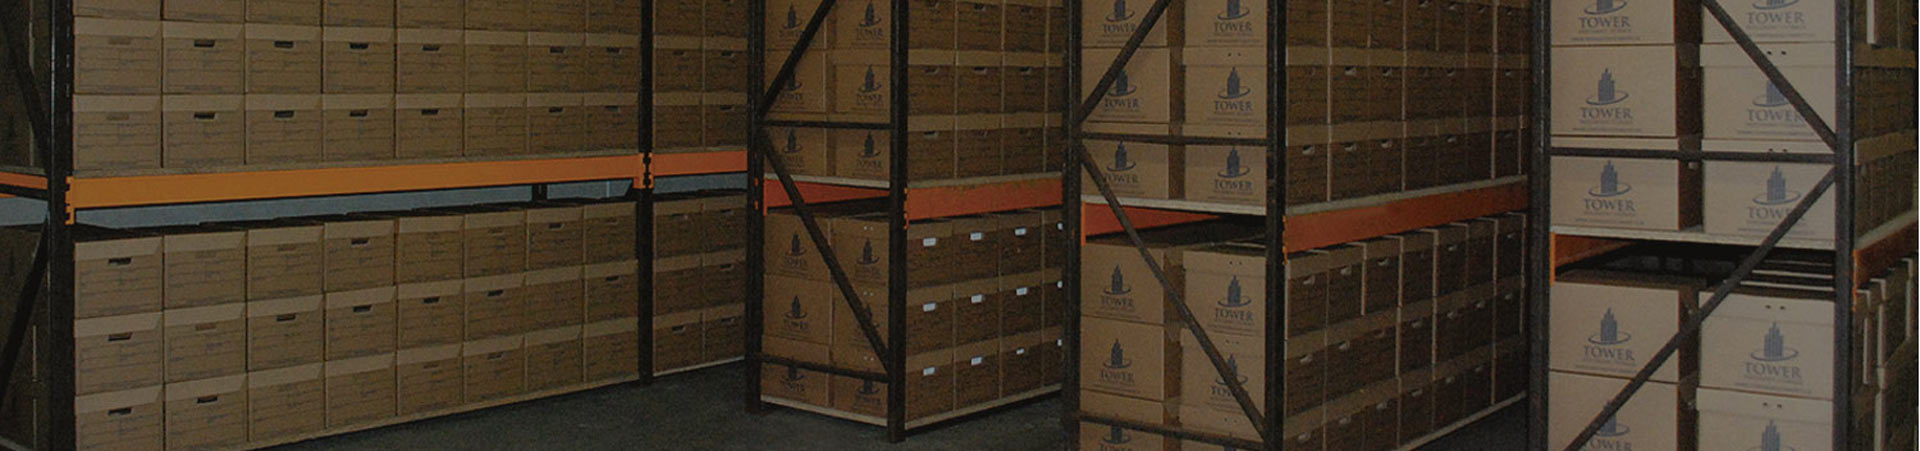 Tower Document Storage Secure Facilities